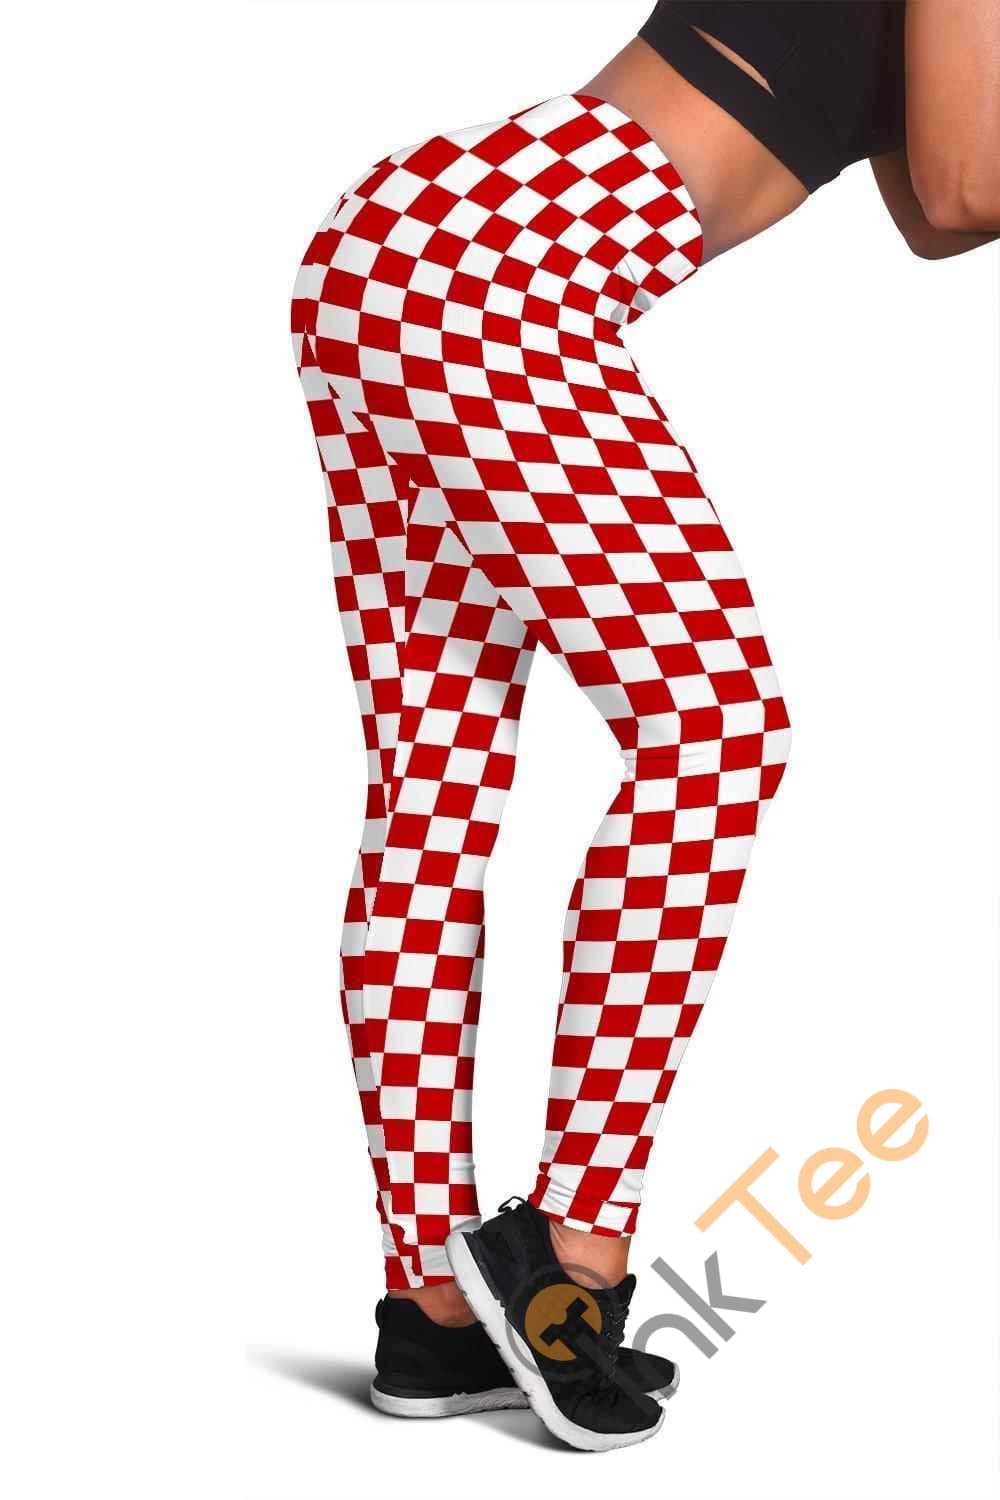 Inktee Store - Nc State Wolfpack Fan Inspired 3D All Over Print For Yoga Fitness Checkers Women'S Leggings Image